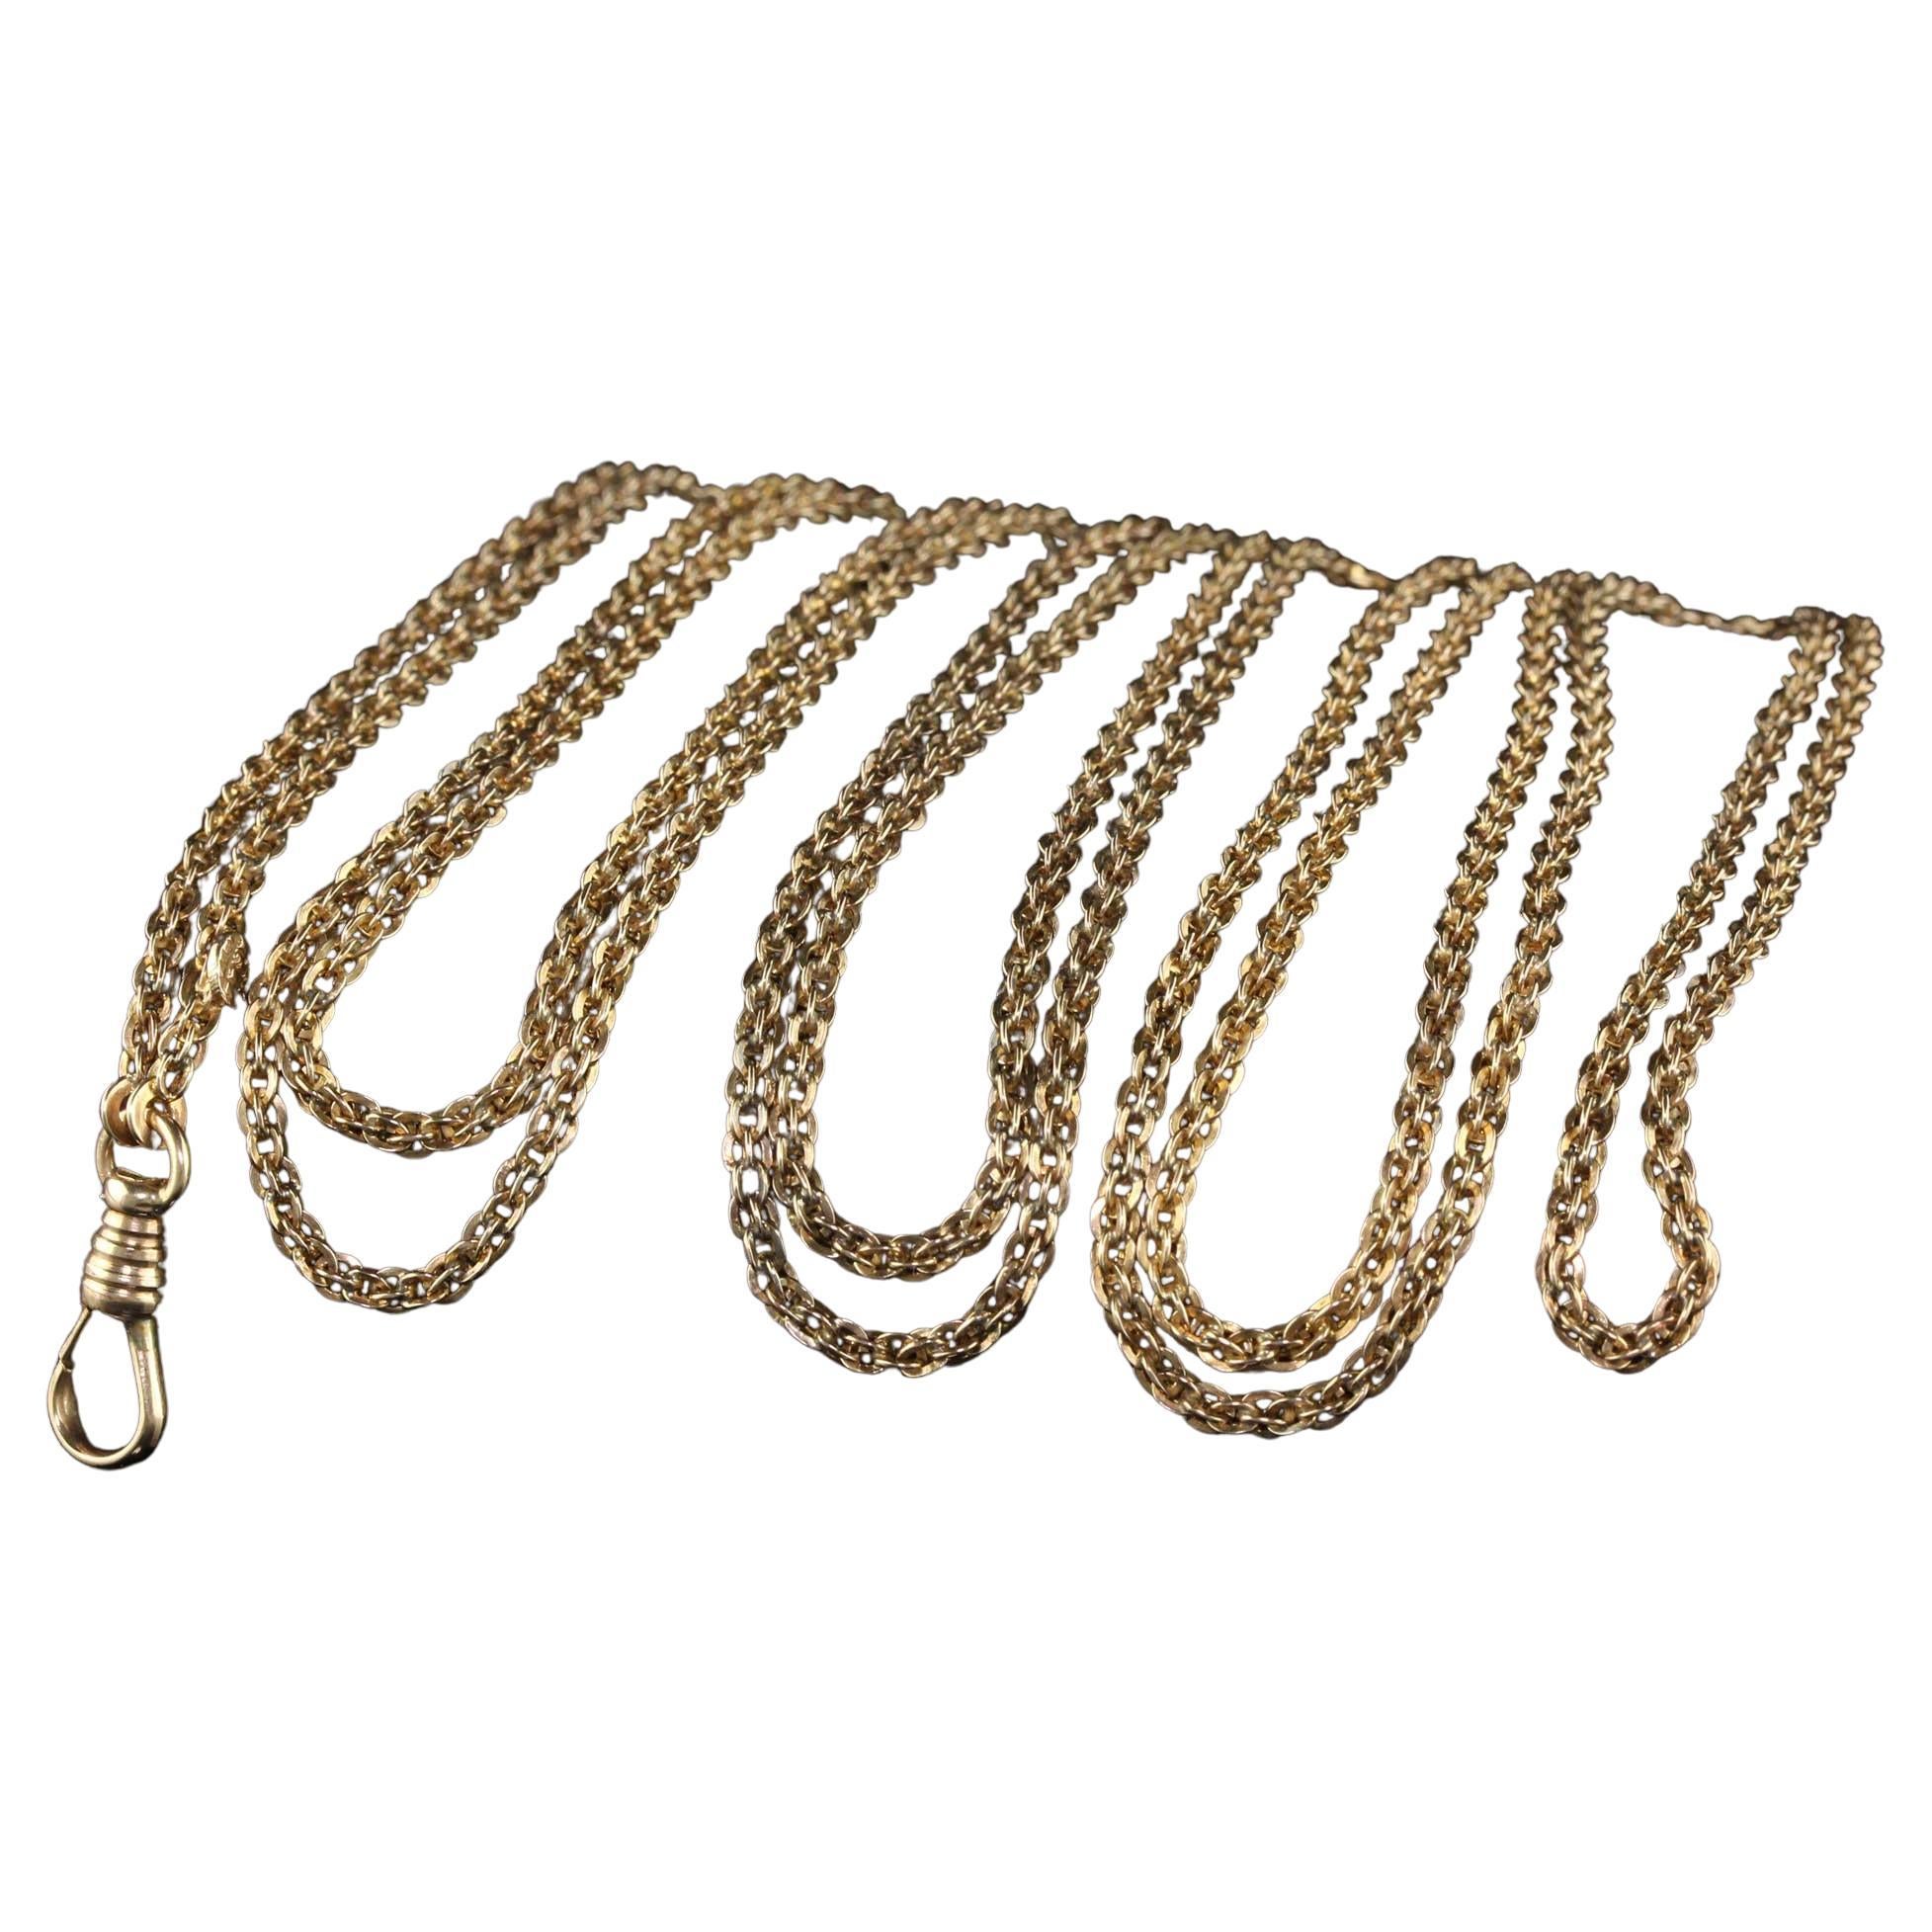 Antique Art Deco 14k Yellow Gold Intertwined Link Double Strand Chain